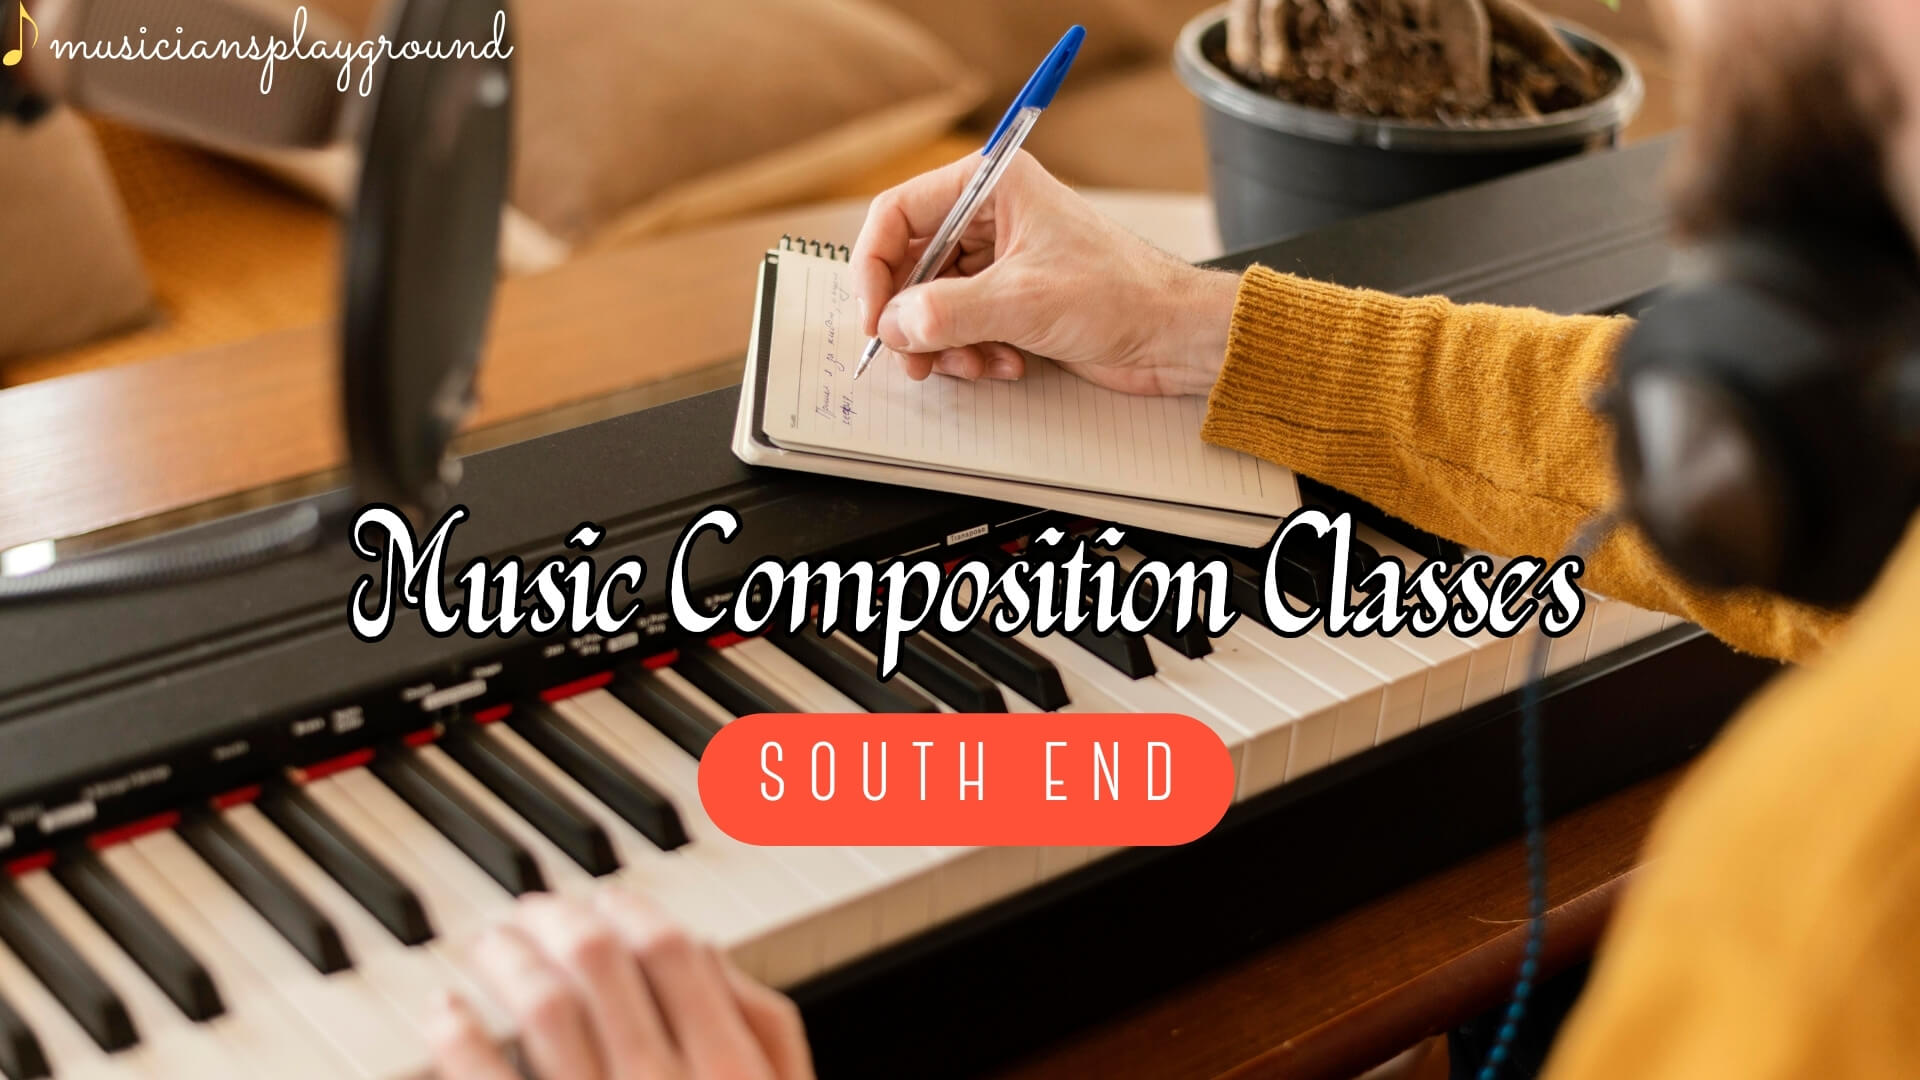 Welcome to South End: The Perfect City for Music Composition Classes